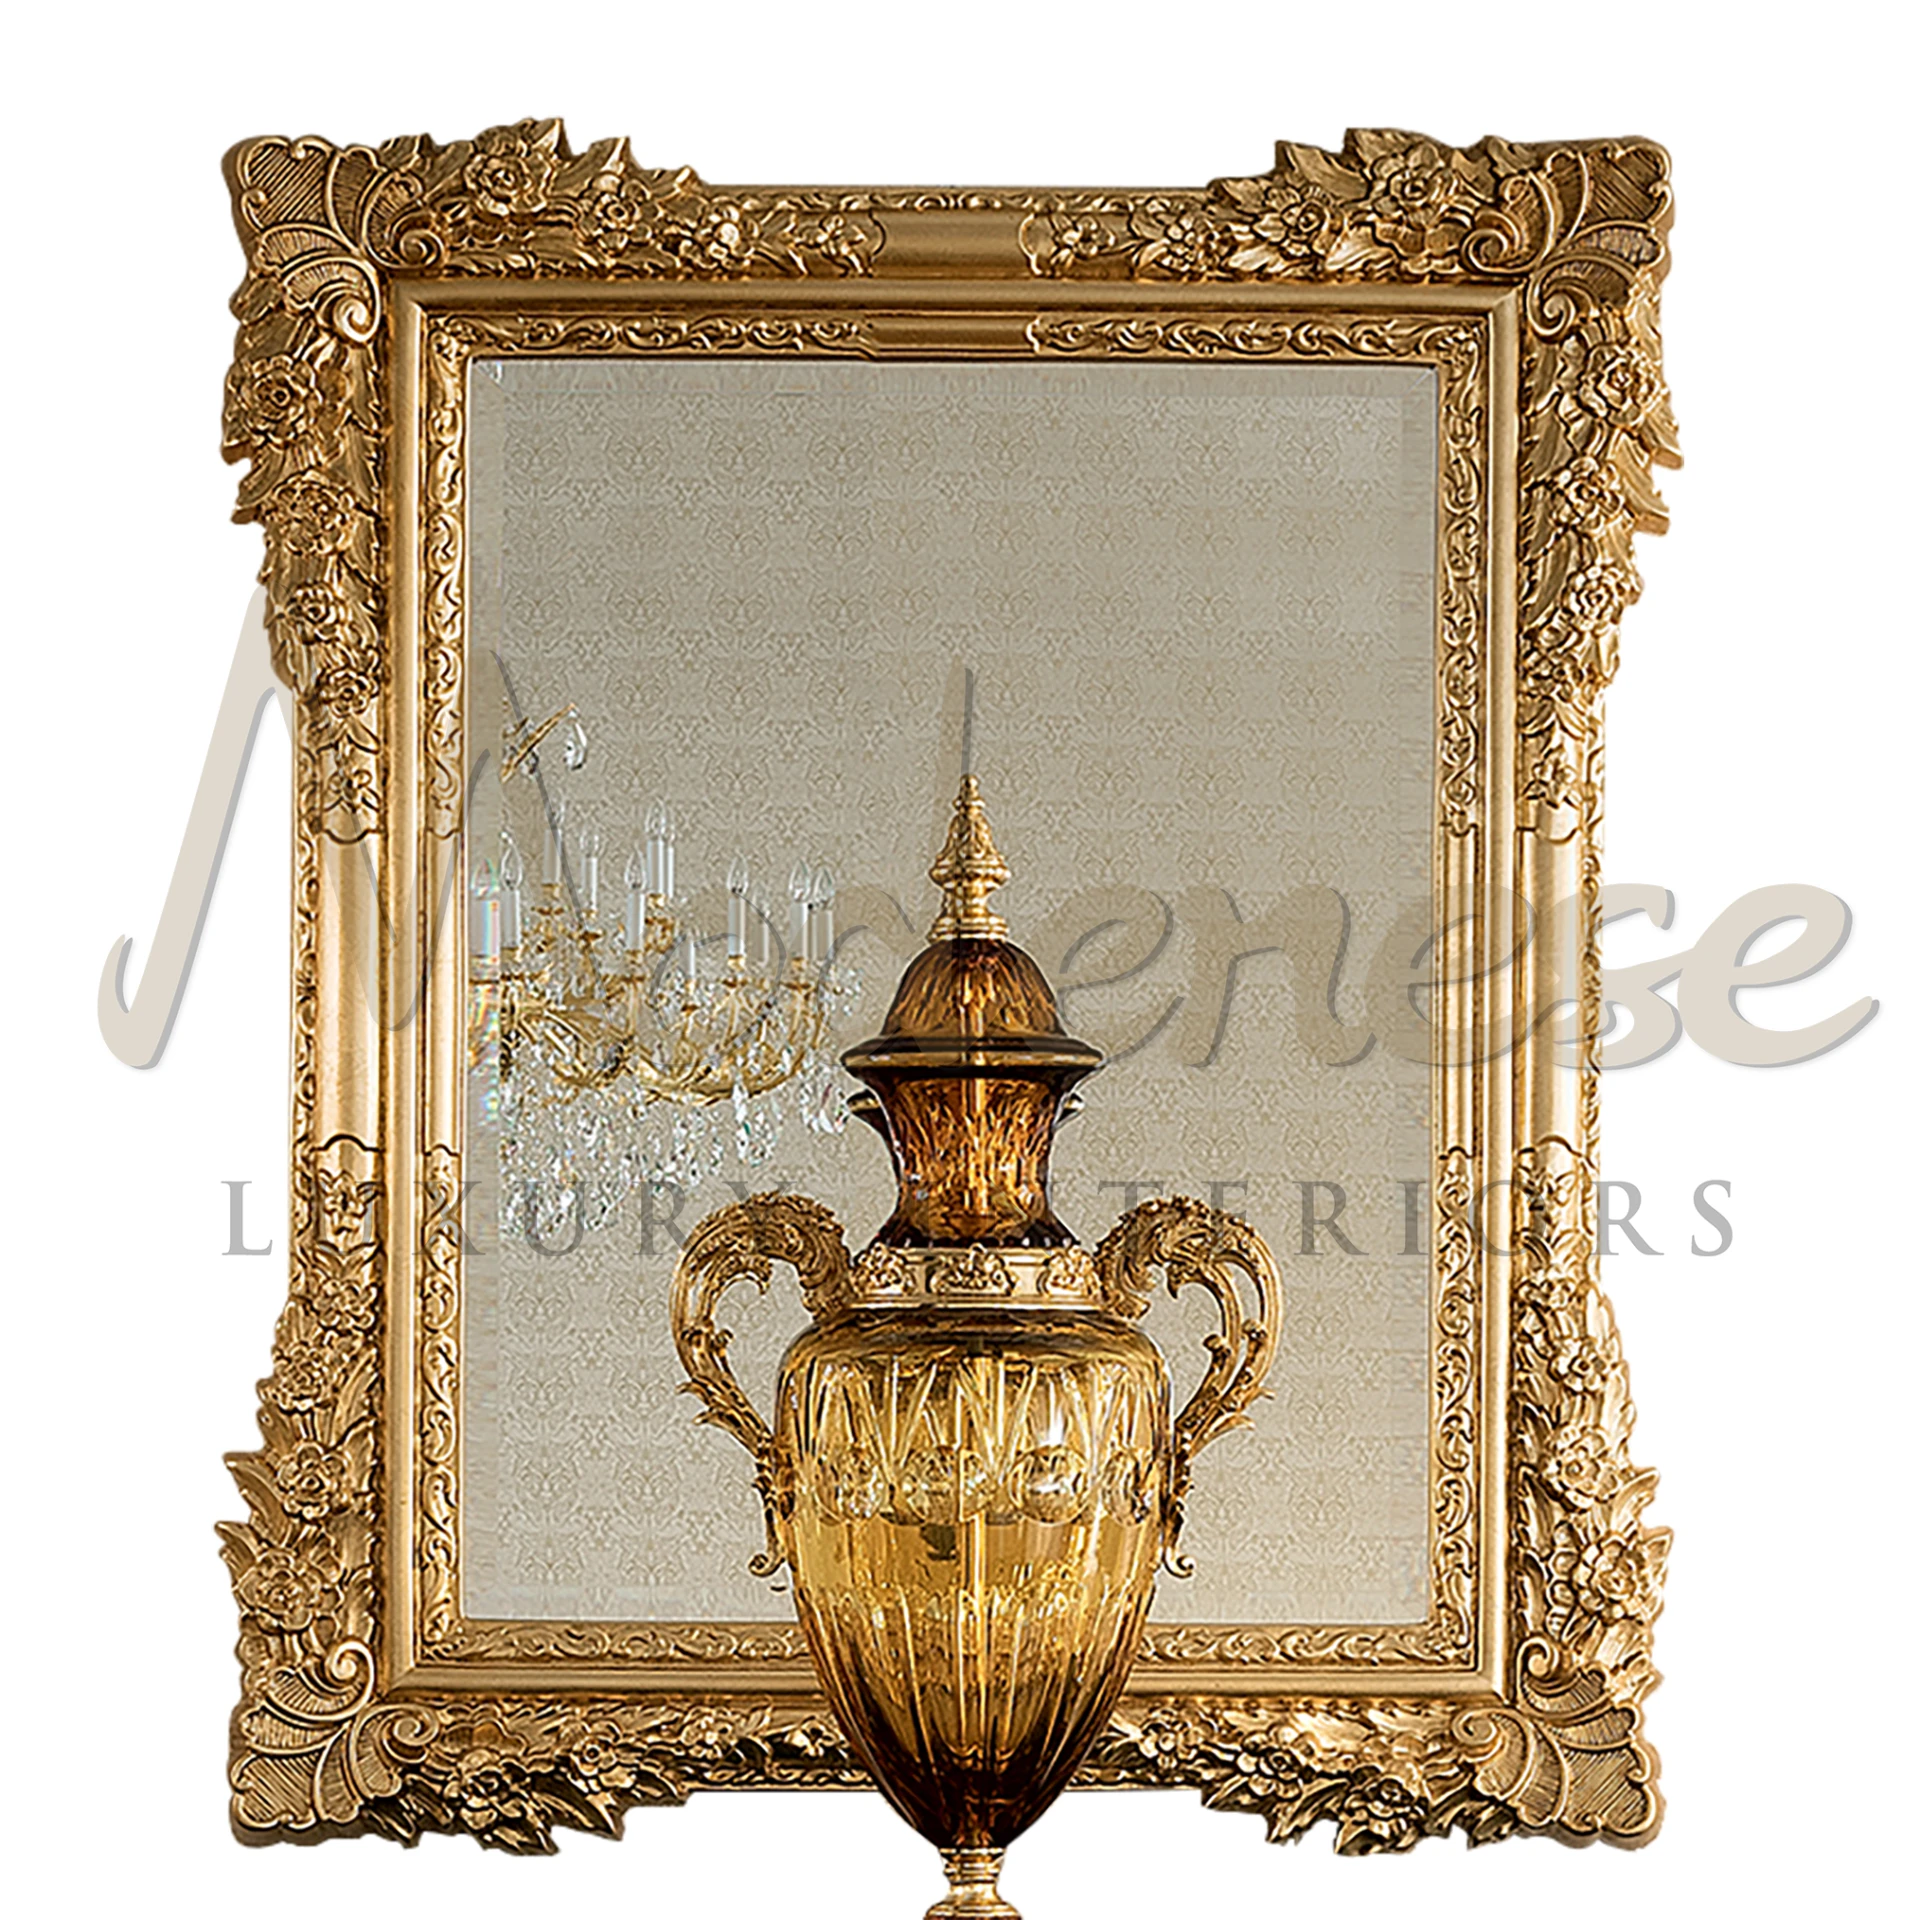 Rectangular Classic Gold Leaf Mirror, blending timeless style and luxury, perfect for adding elegance to home decor.